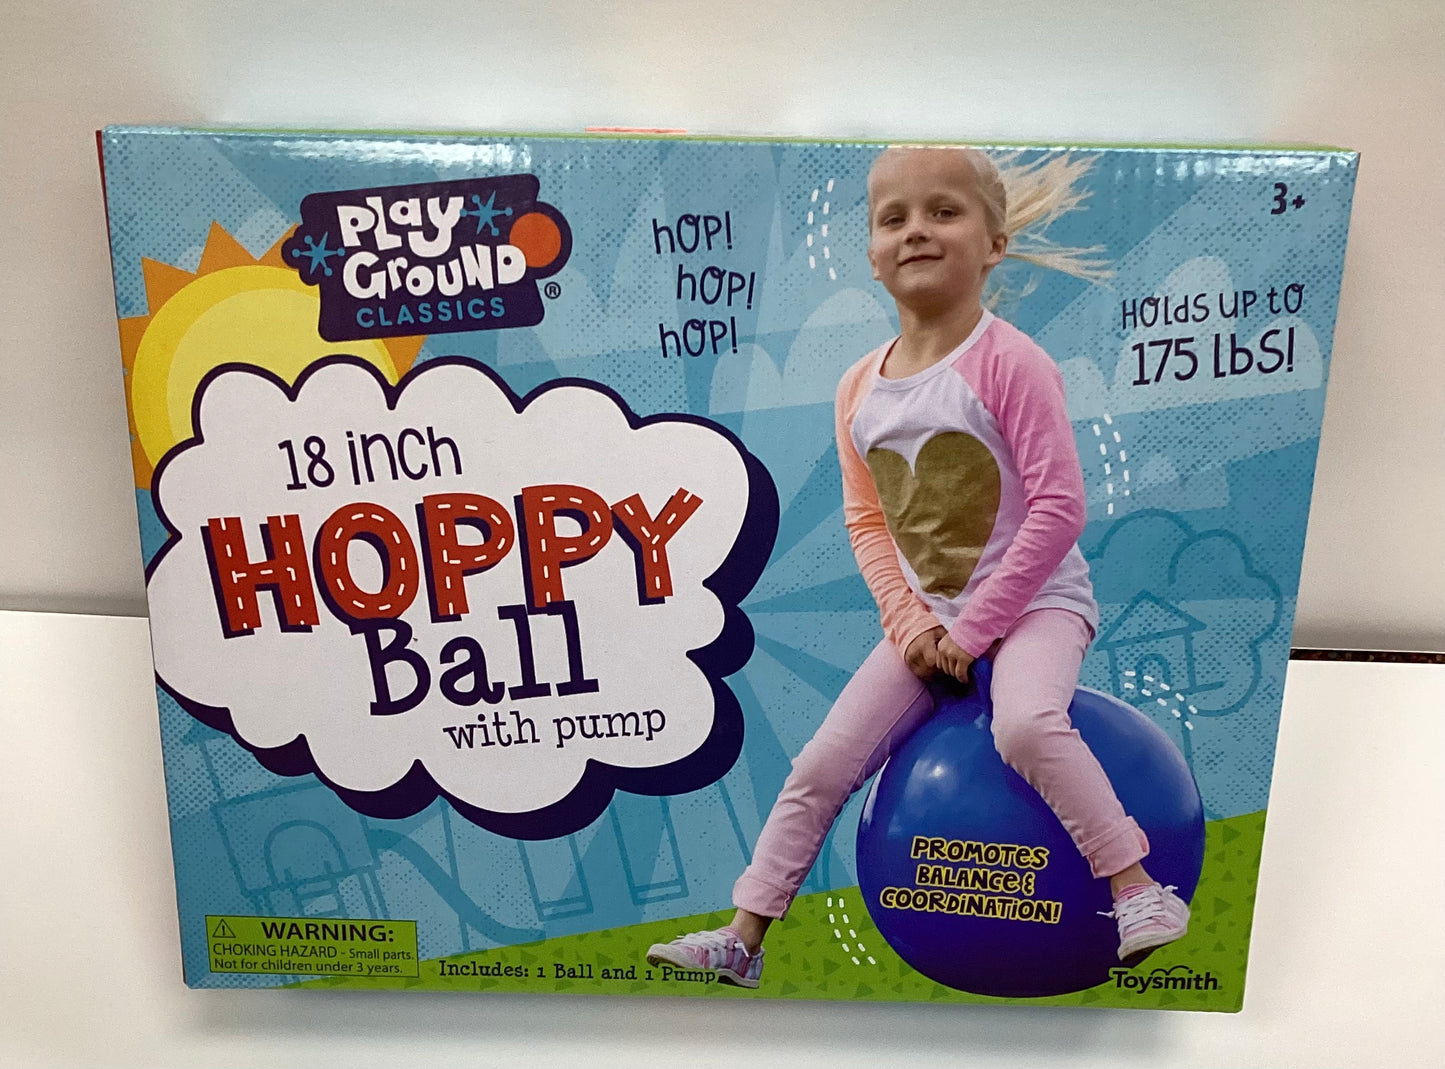 18” Hoppy Ball with pump (assorted colors)